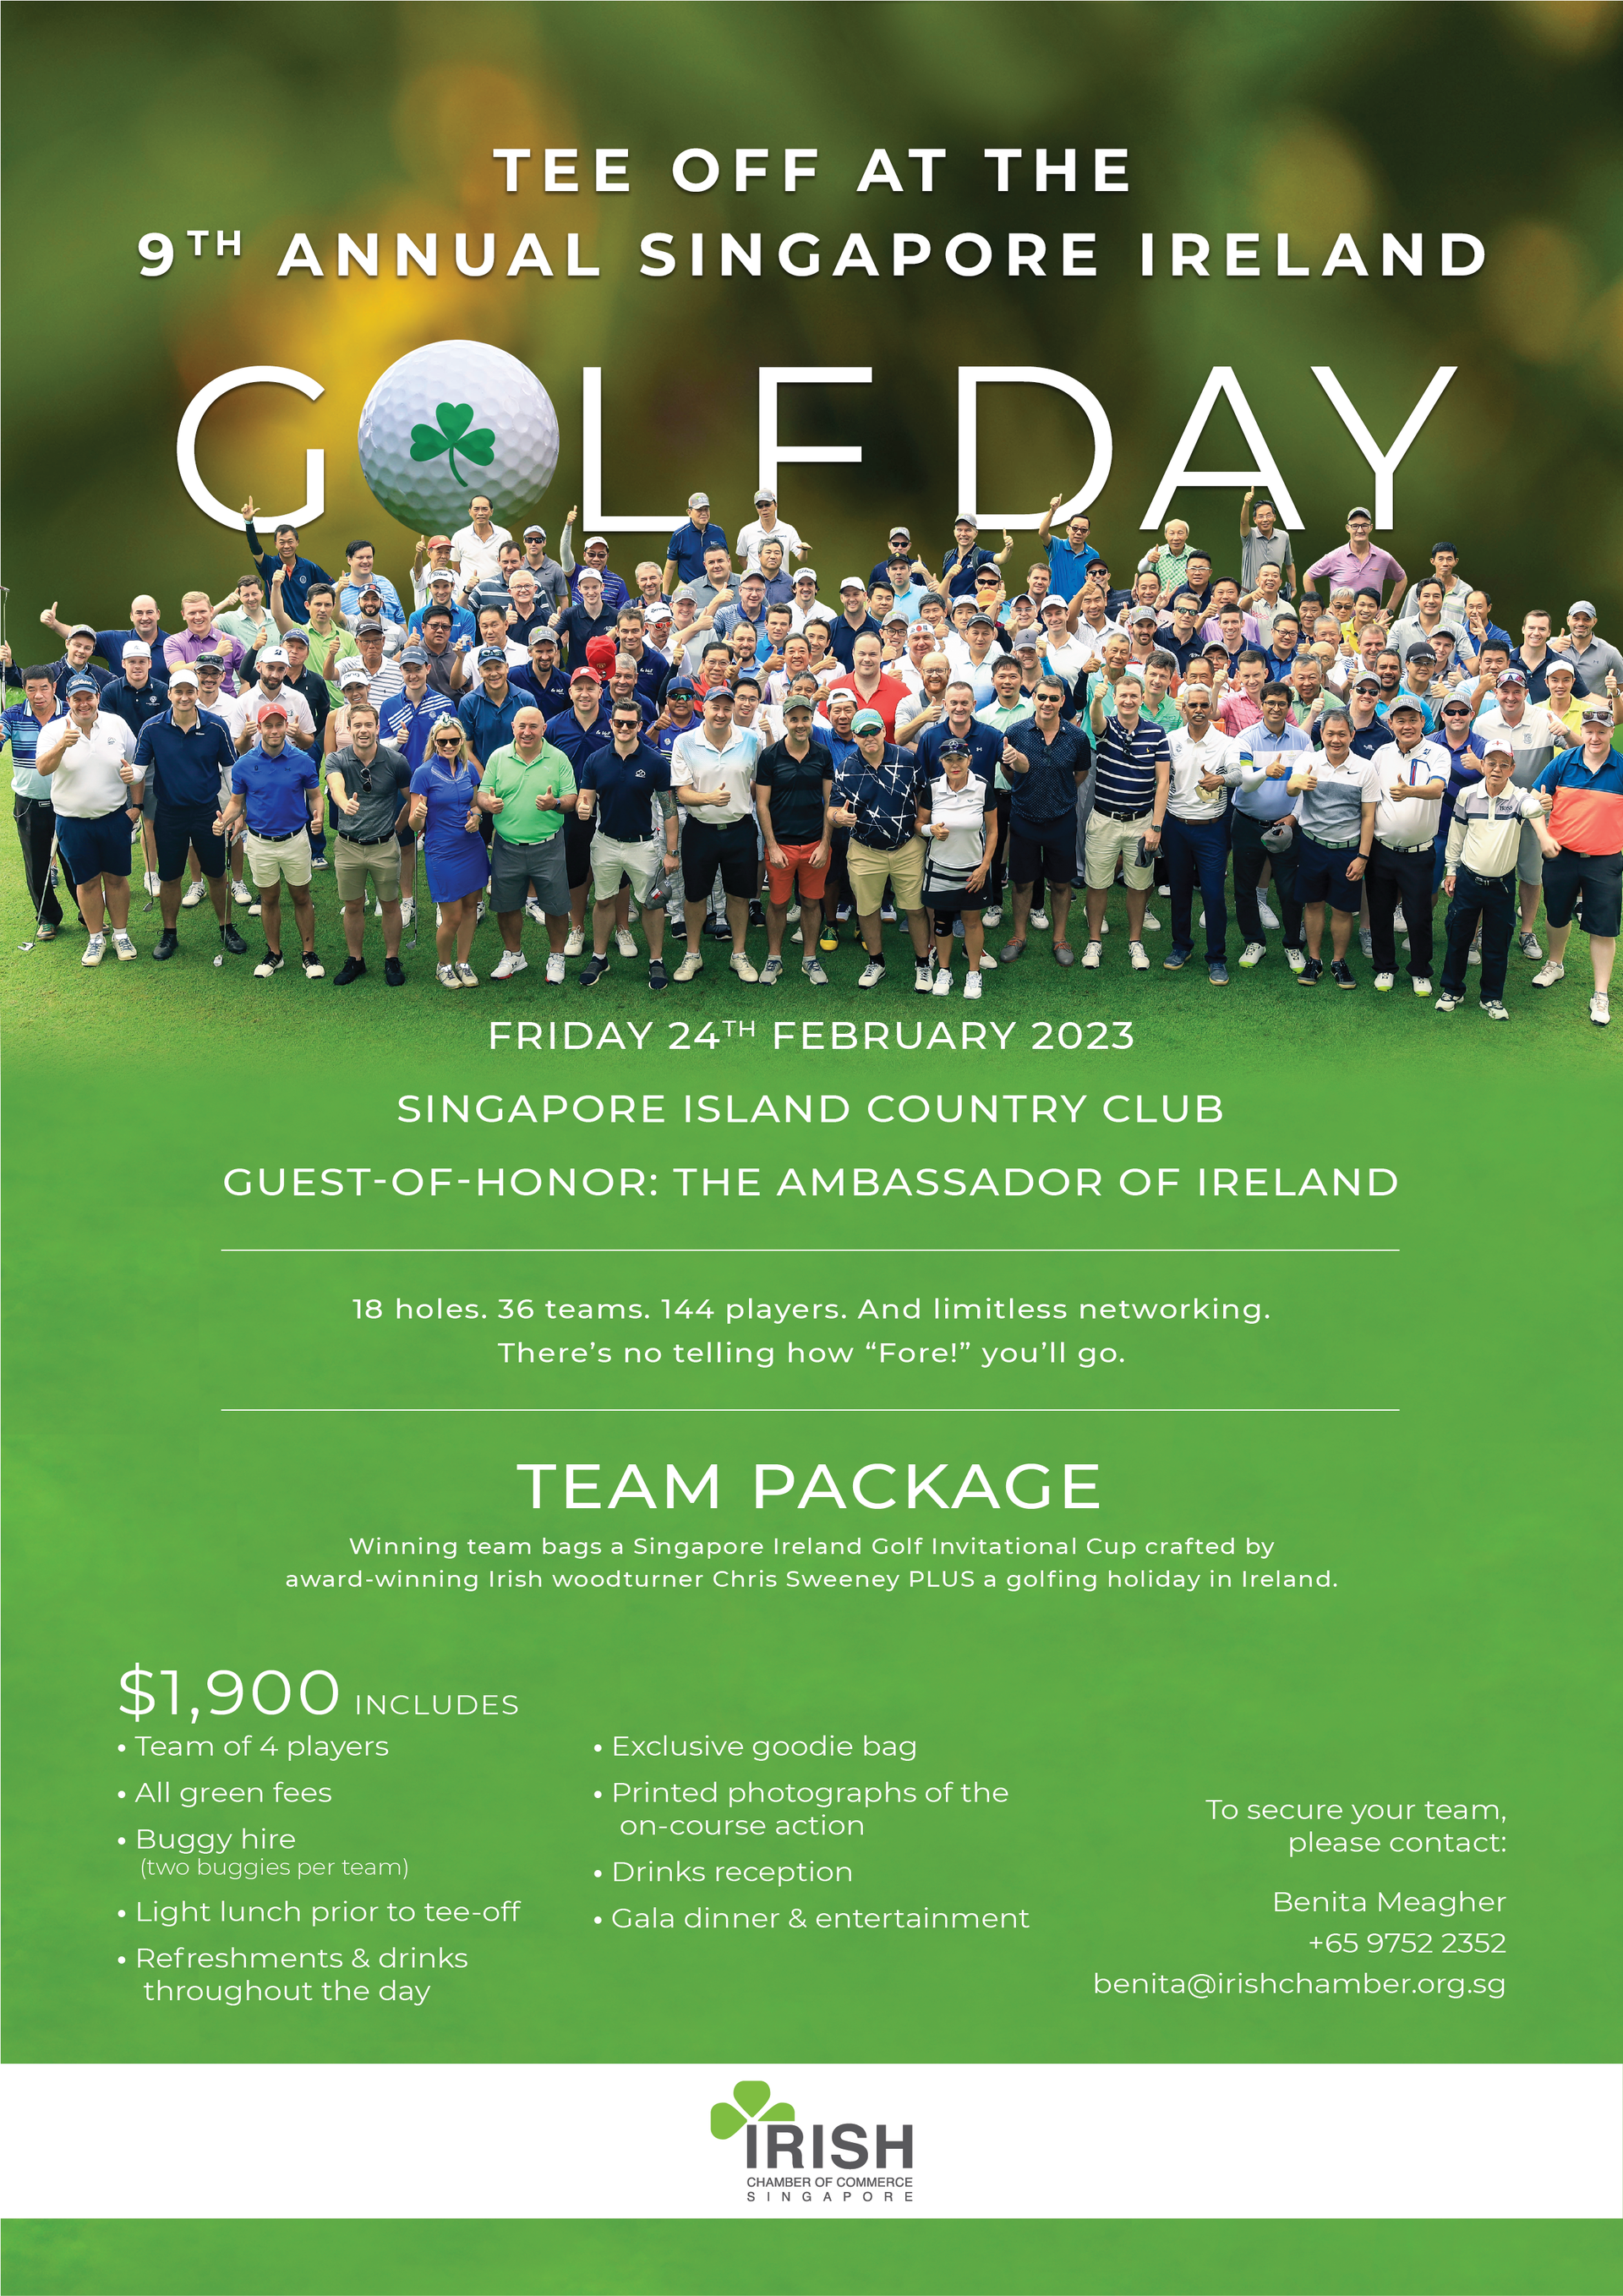 thumbnails Tee off at the 9th Annual Singapore Ireland Golf Day - 24th February 2023